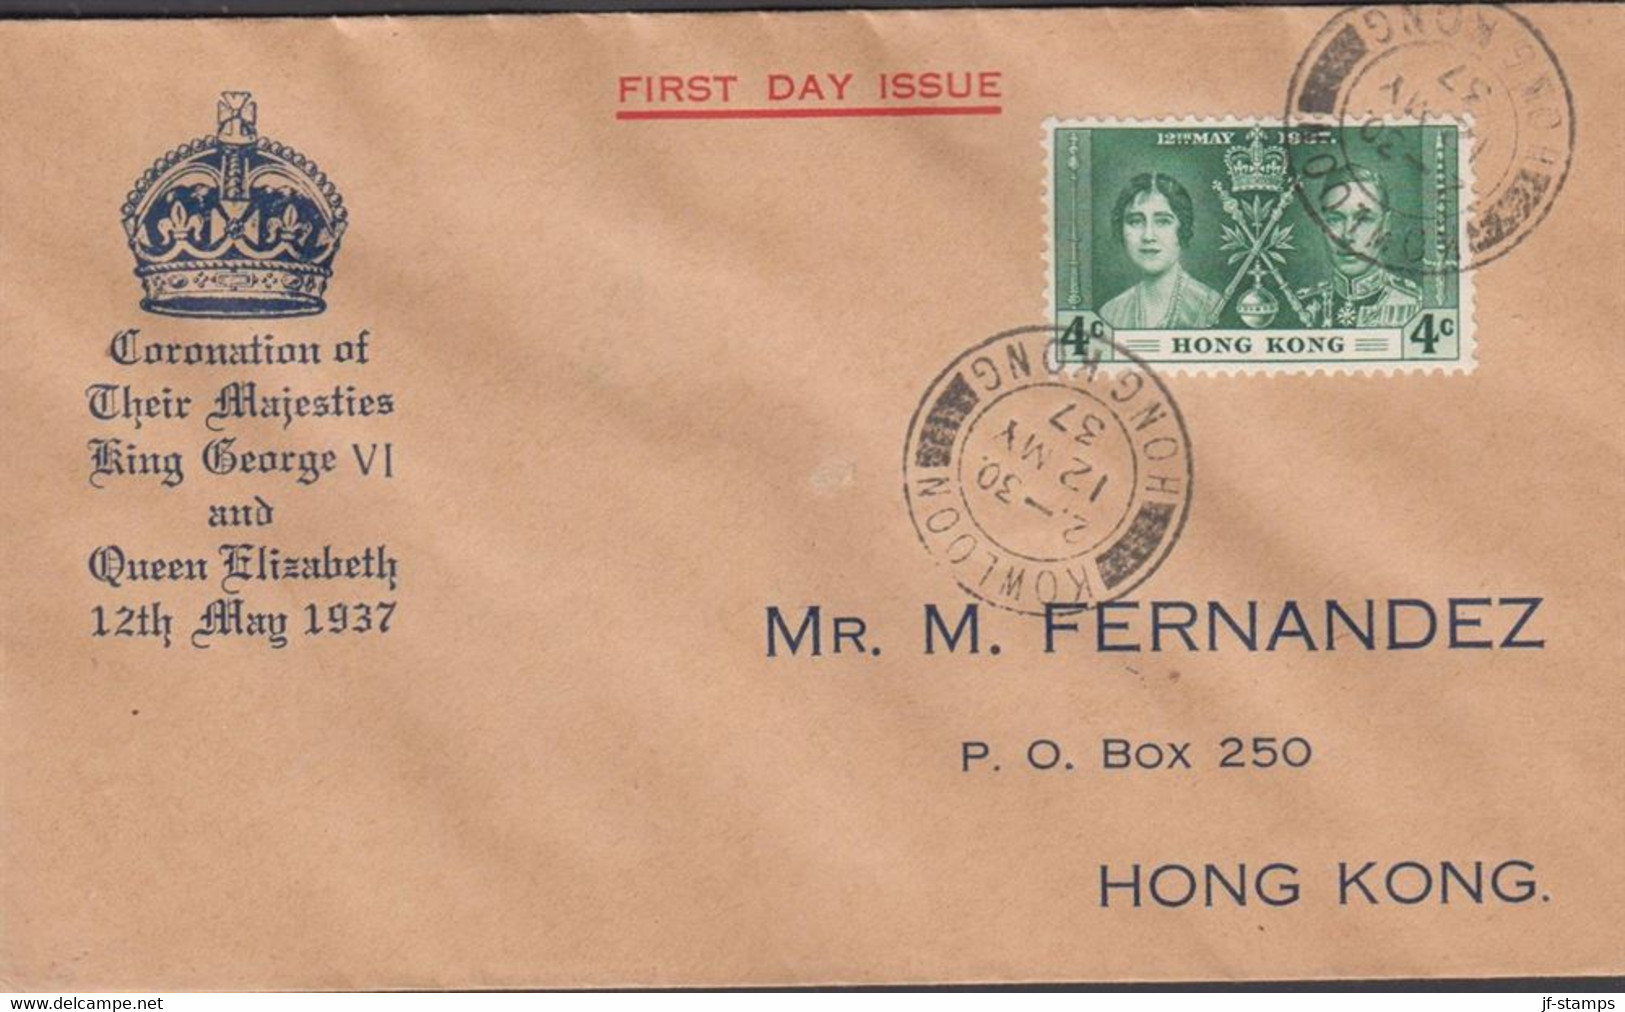 1937. HONG KONG Georg VI. 4 C Coronation On Nice FDC Cancelled FIRST DAY OF ISSUE KOWLOON HON... (Michel 136) - JF427055 - Briefe U. Dokumente